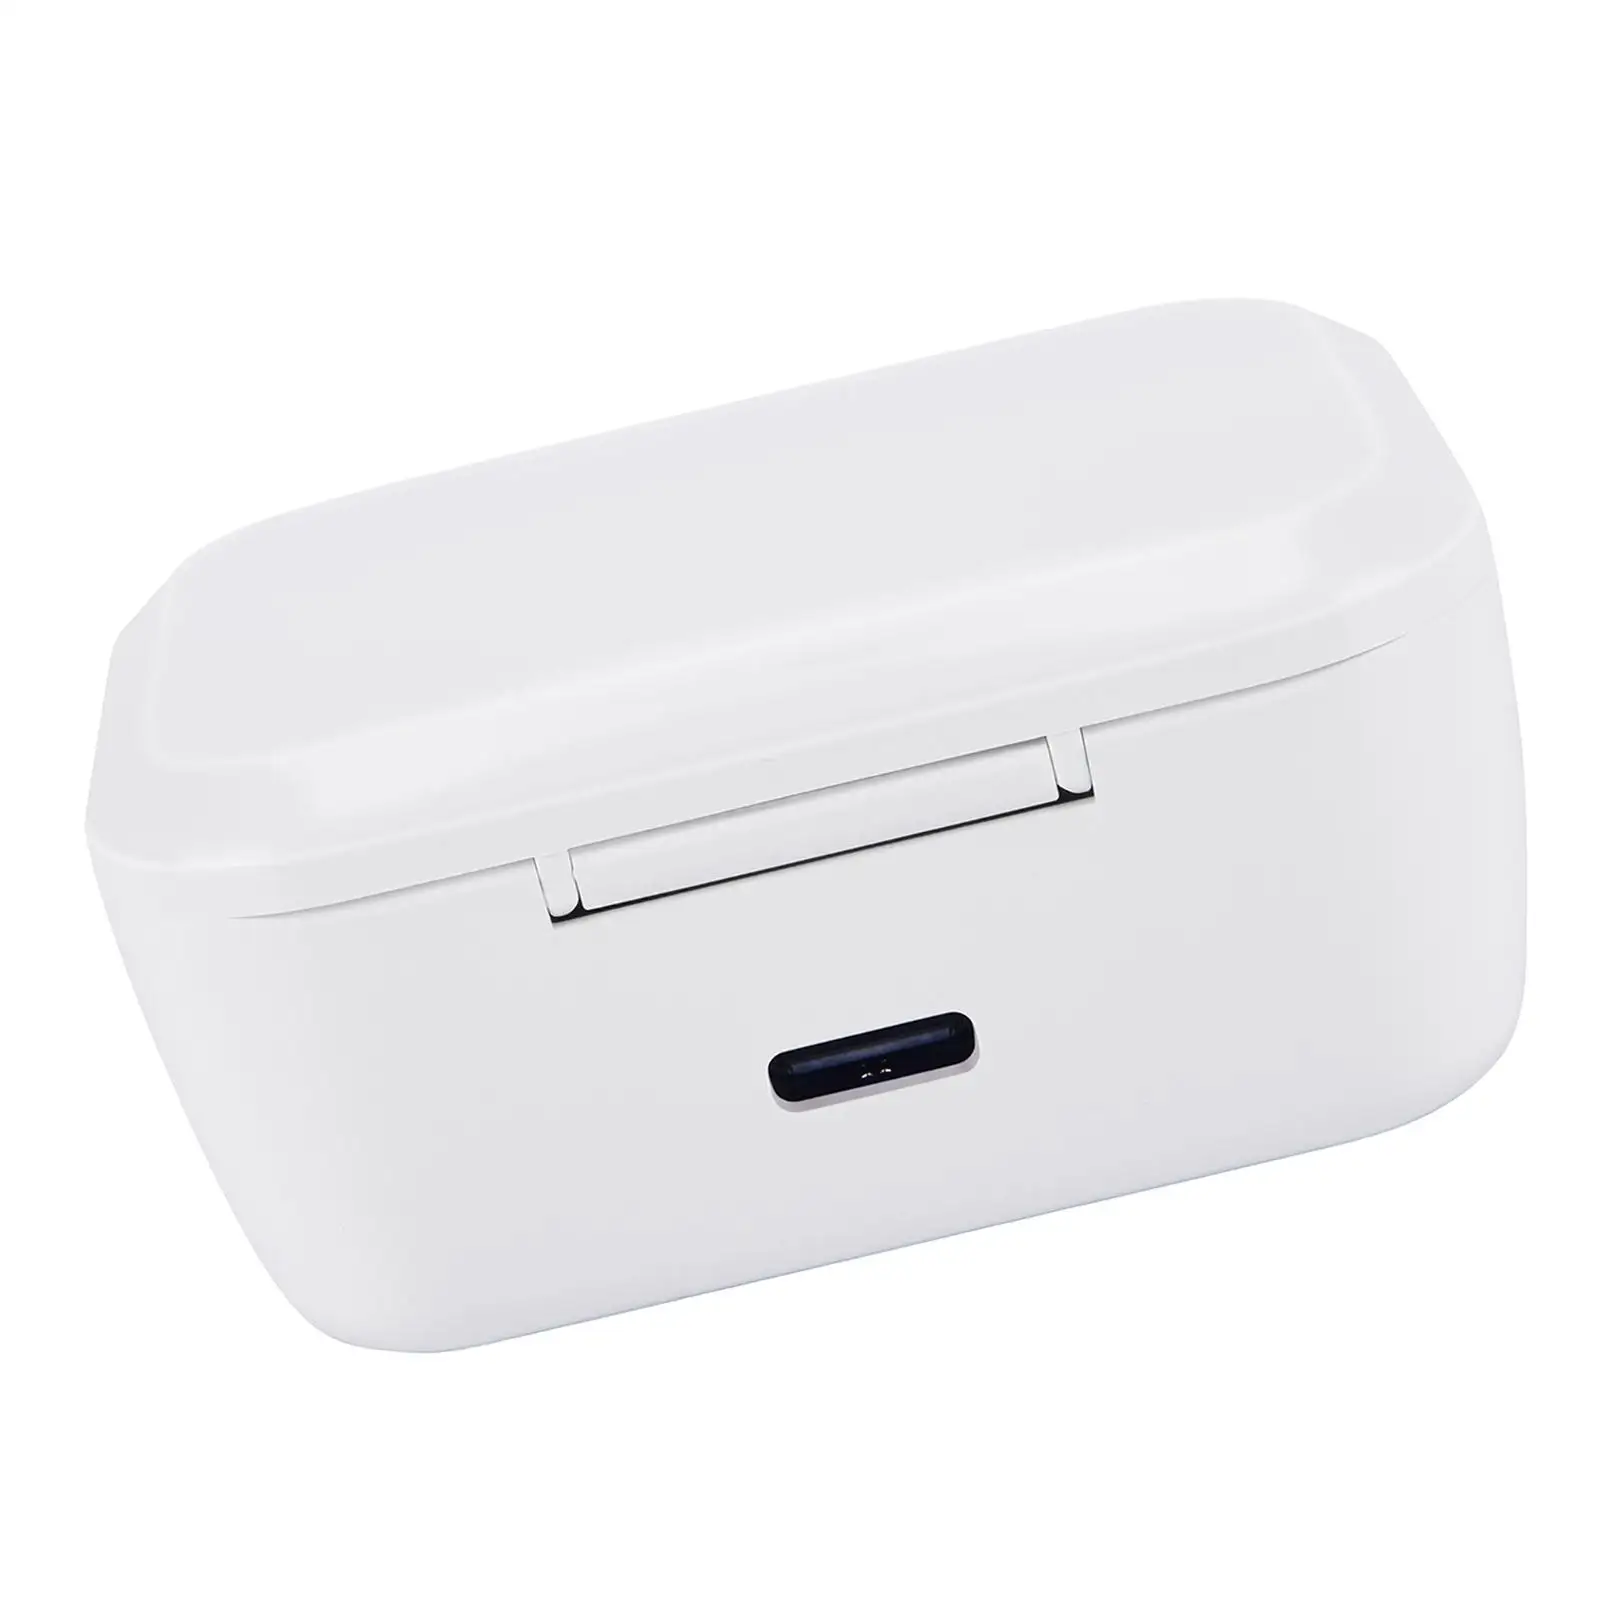 Wireless Watch Charger Accessory Power Ouput 5V 200MA Portable Charger for Office Travel